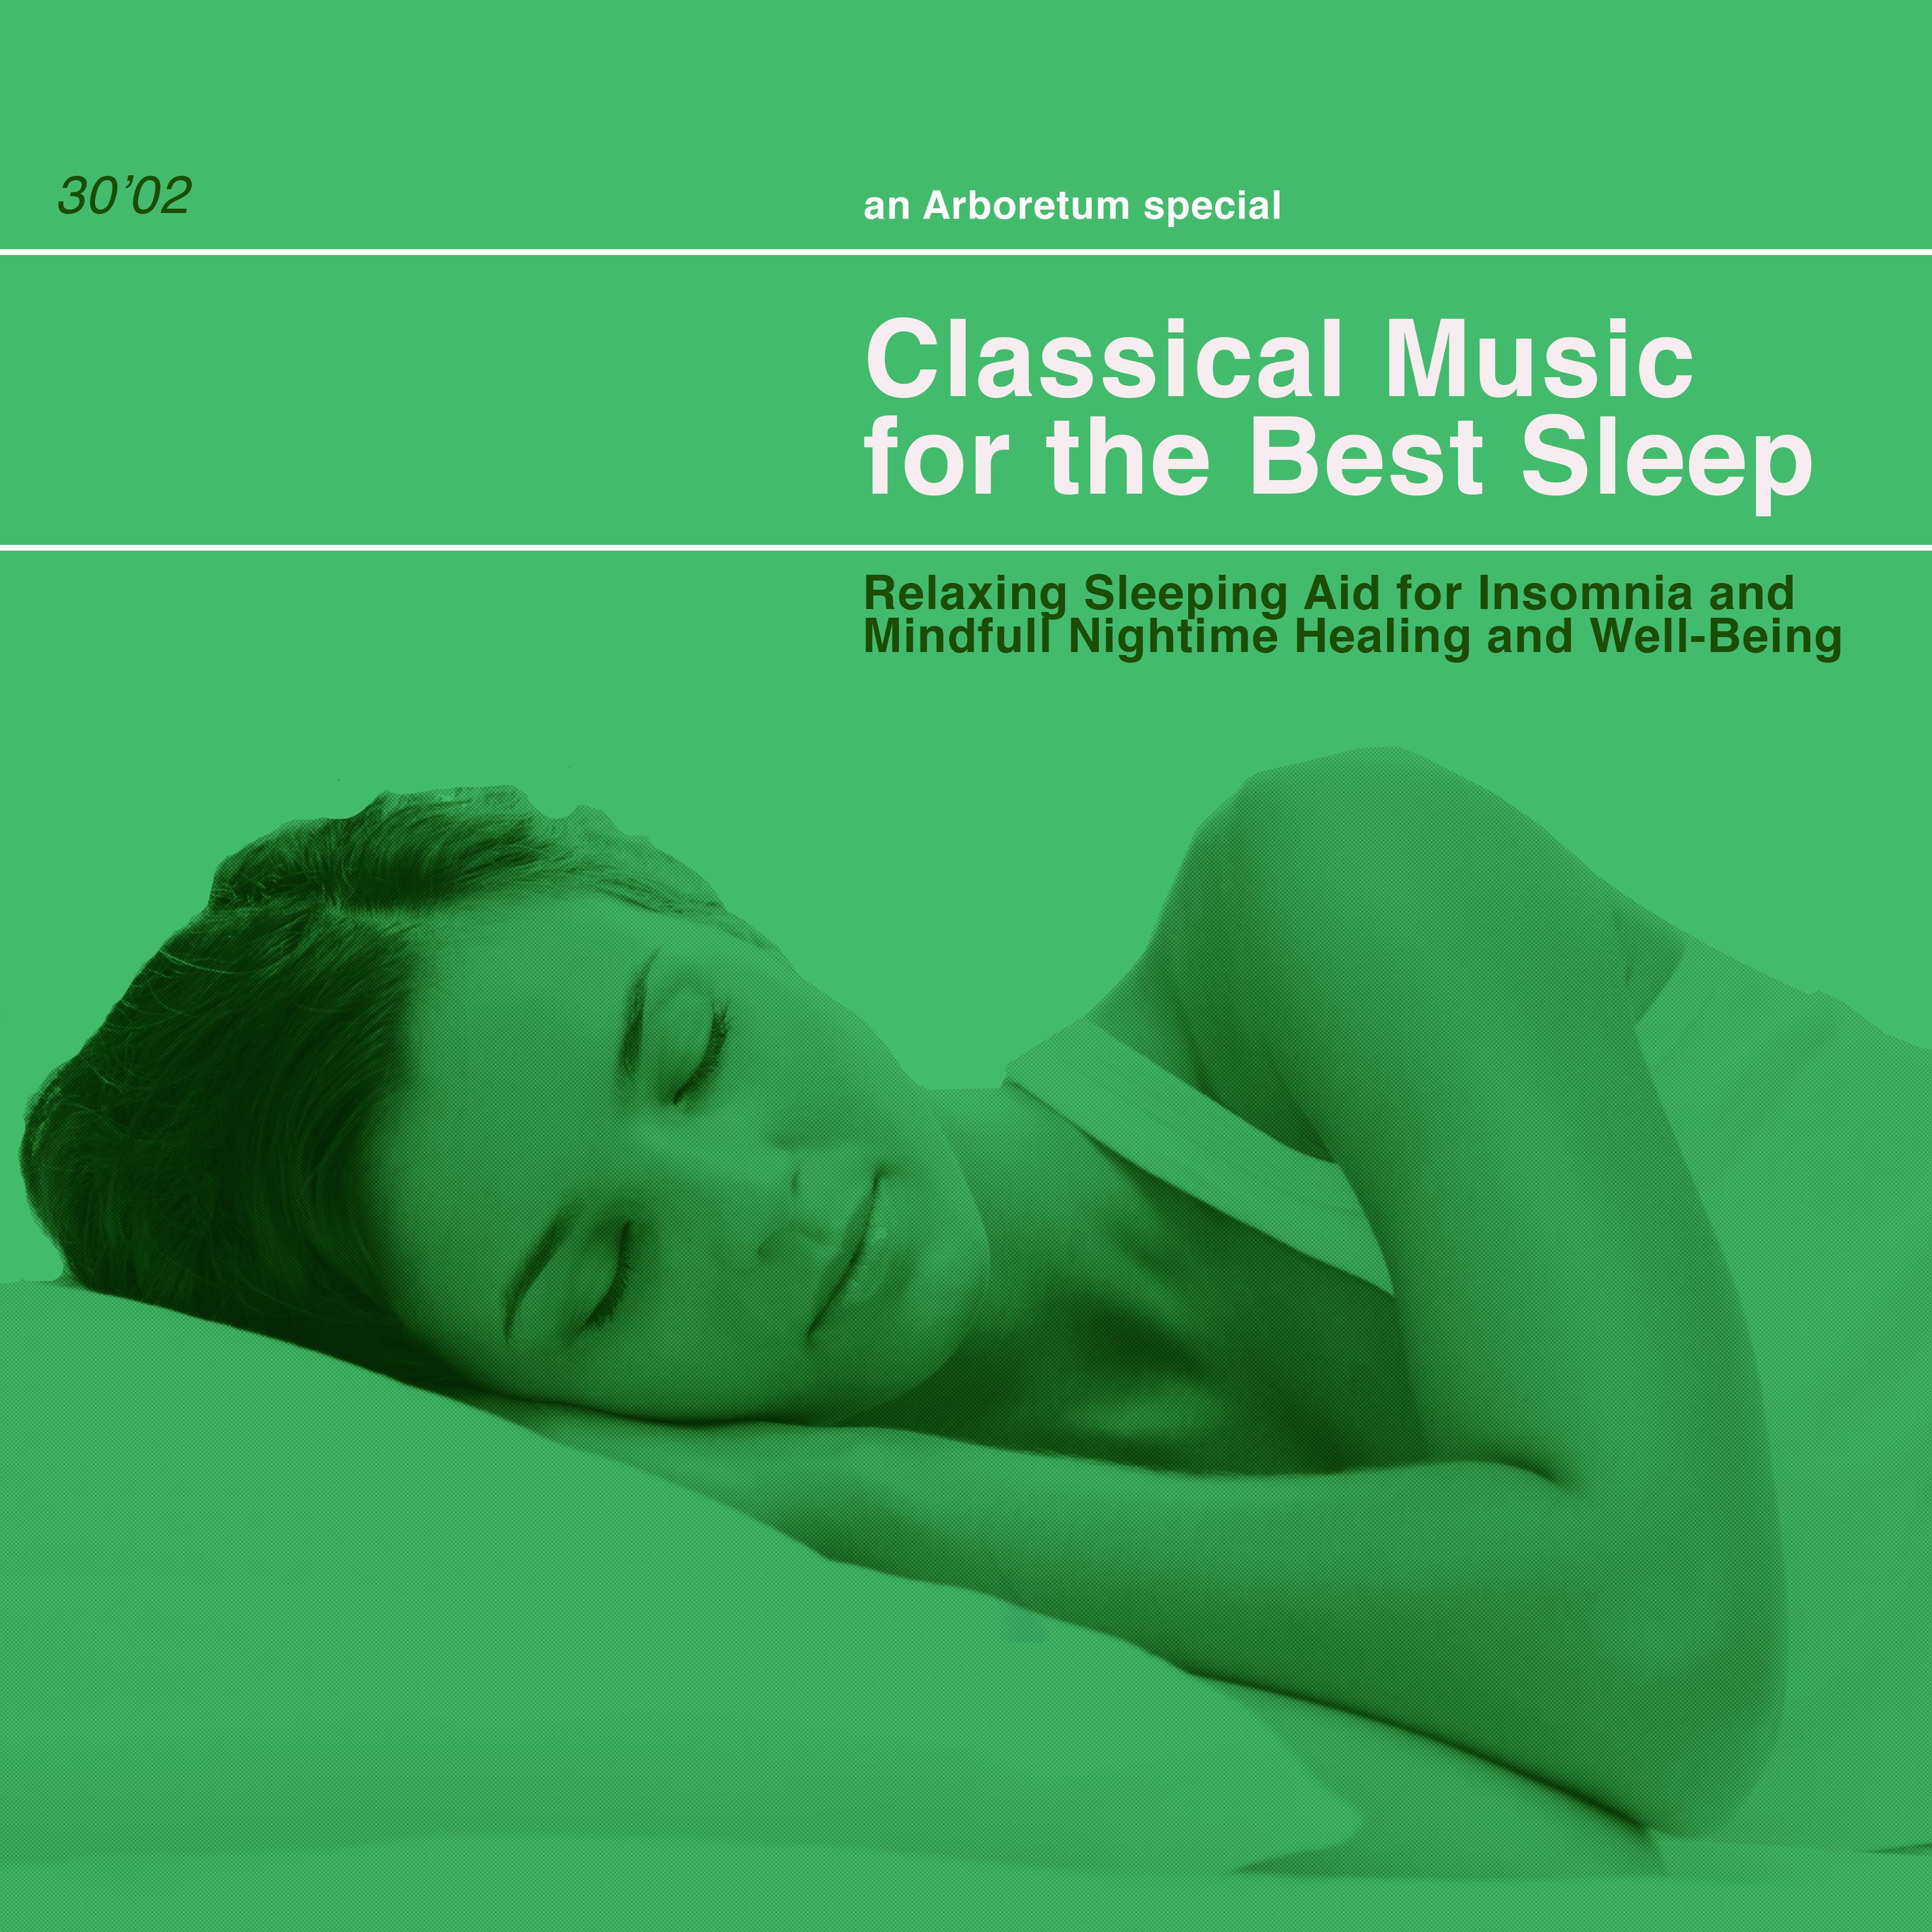 Classical Music for the Best Sleep: Relaxing Sleeping Aid for Insomnia and Mindfull Nightime Healing and Well-Being